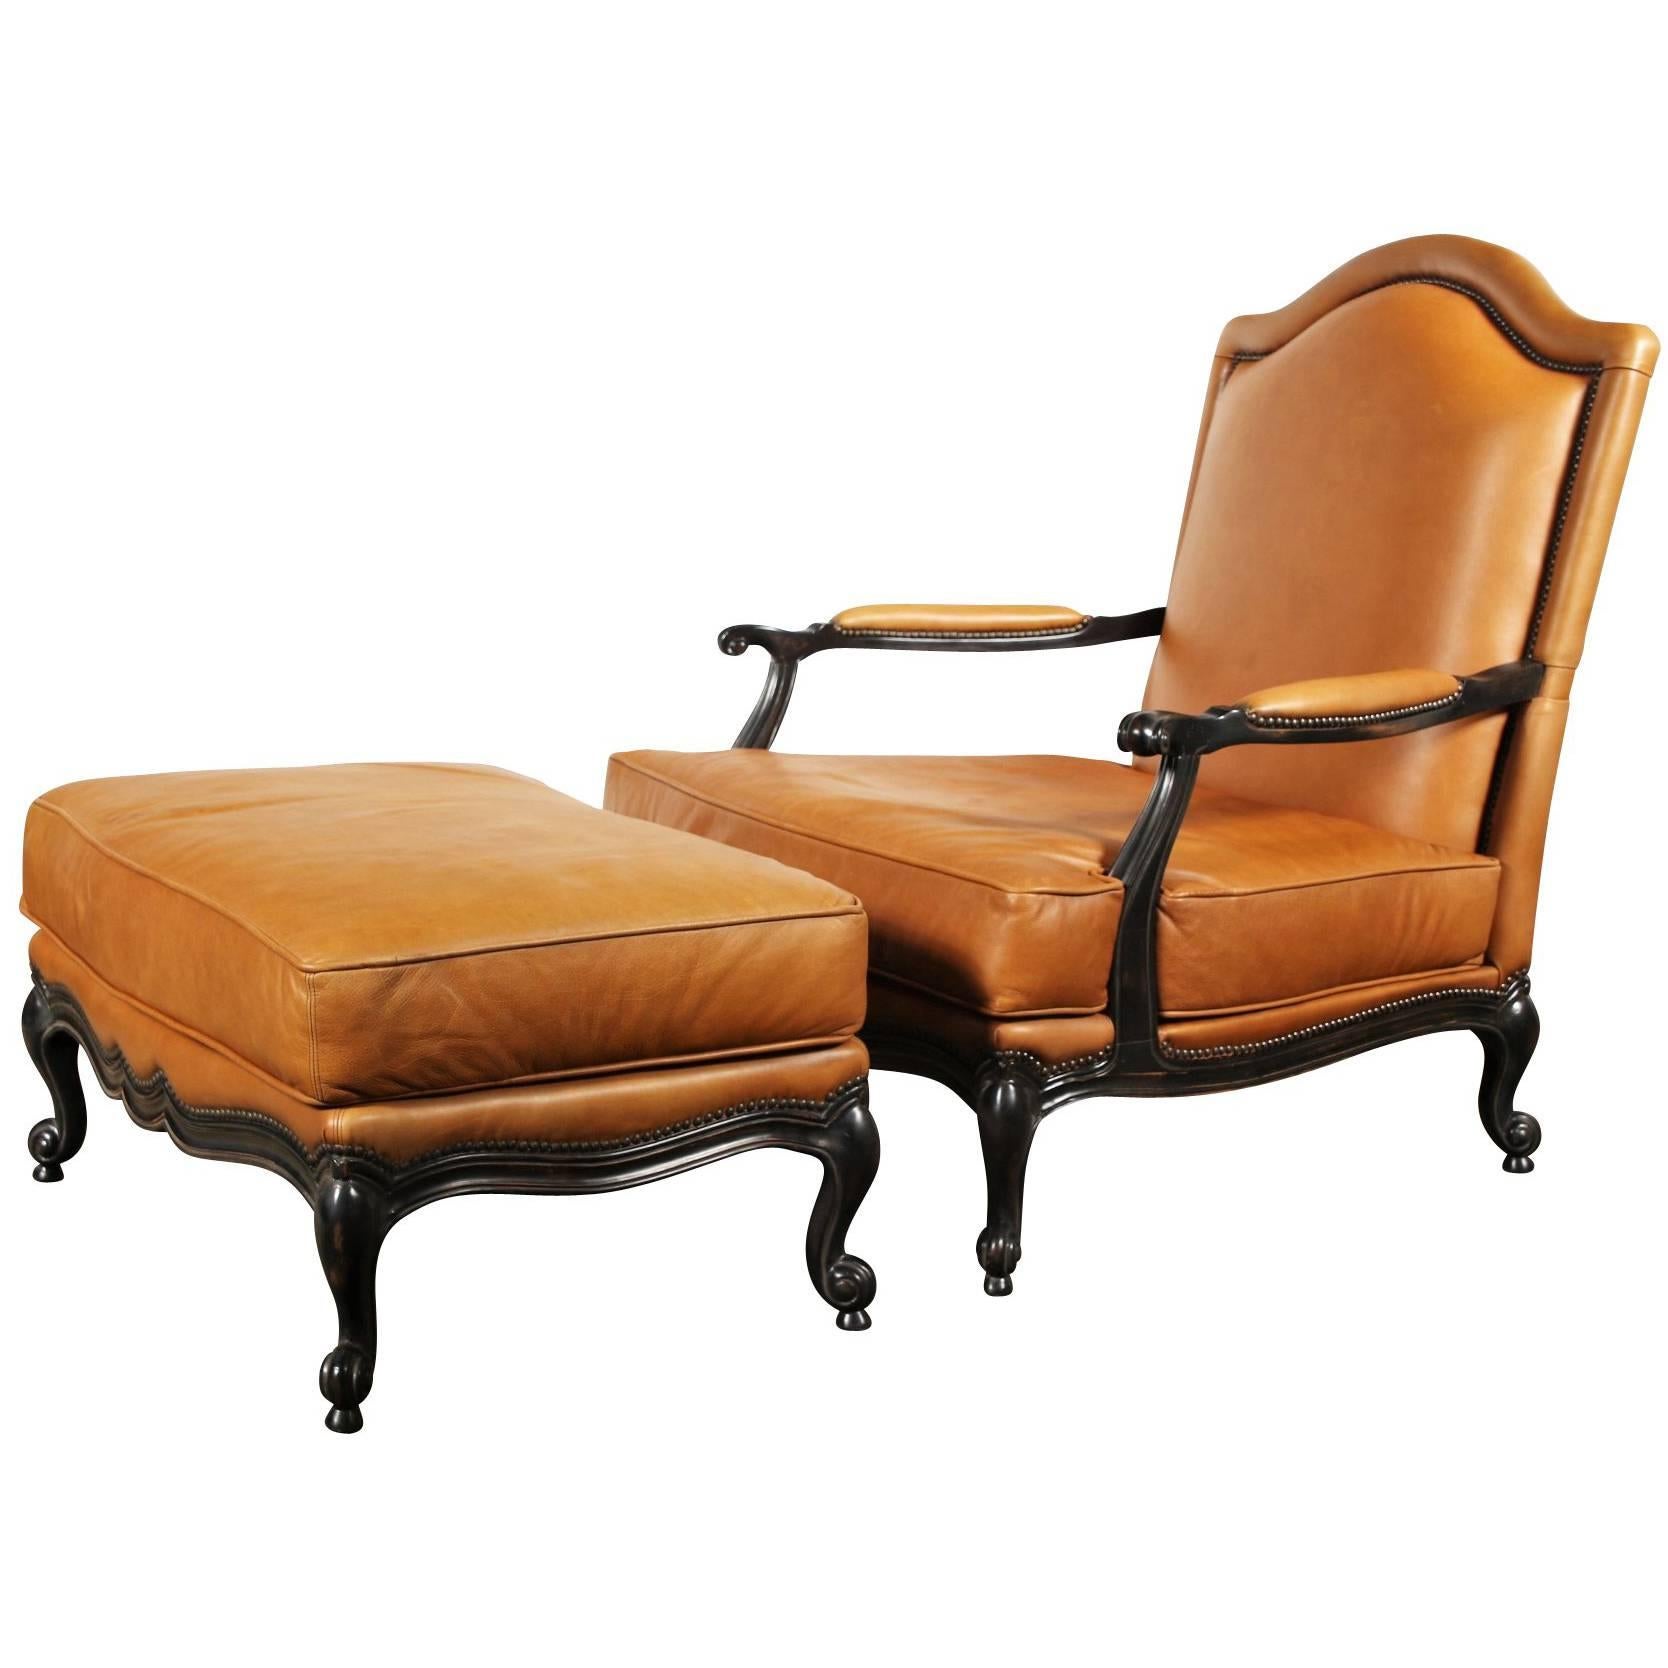 Large Leather Upholstered Bergère and Ottoman